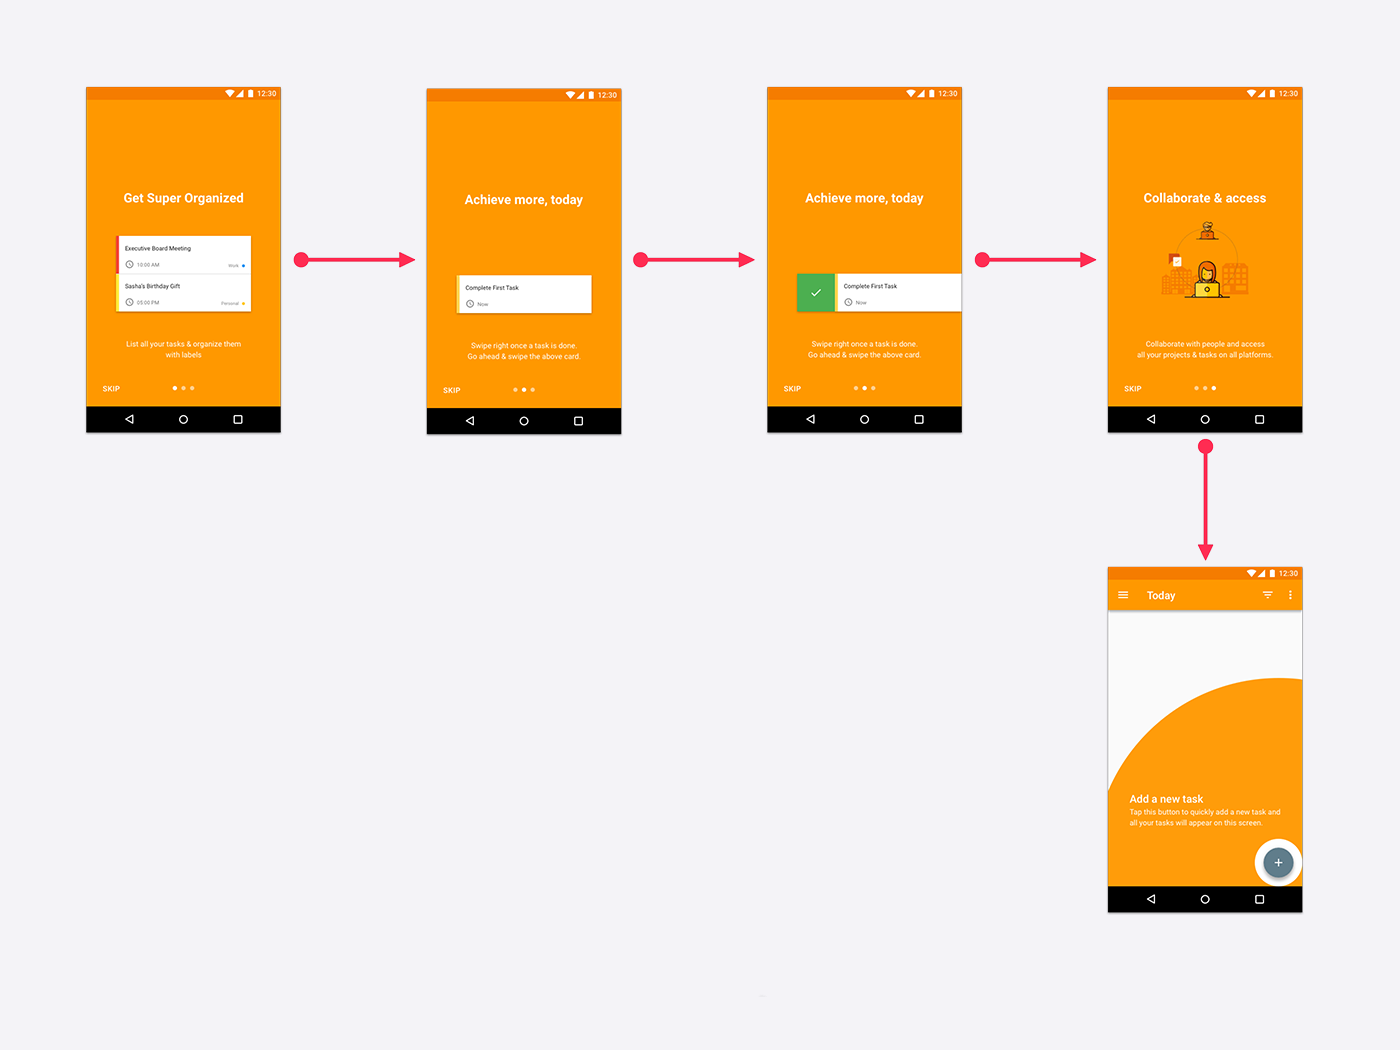 android material design Onboarding material ux UI interaction flow